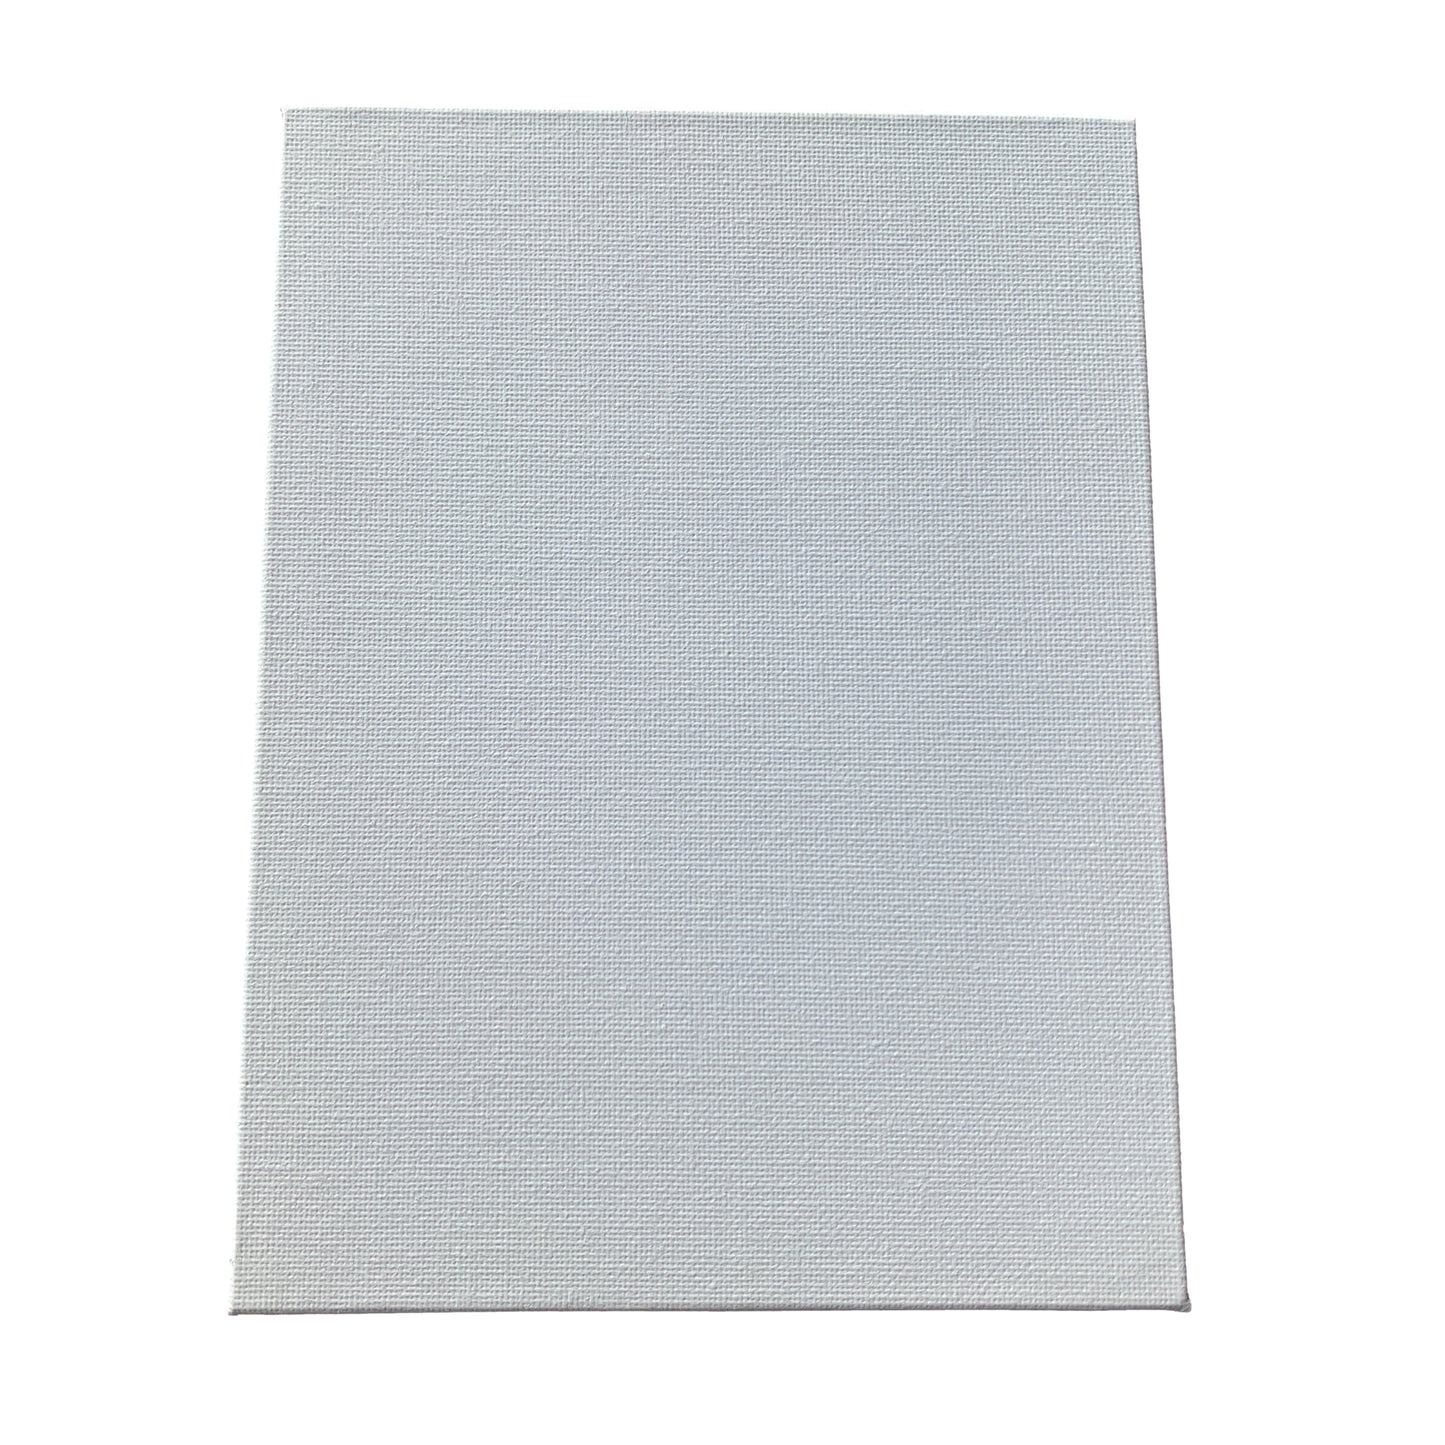 15x20cm Blank White Flat Stretched Board Art Canvas By Janrax